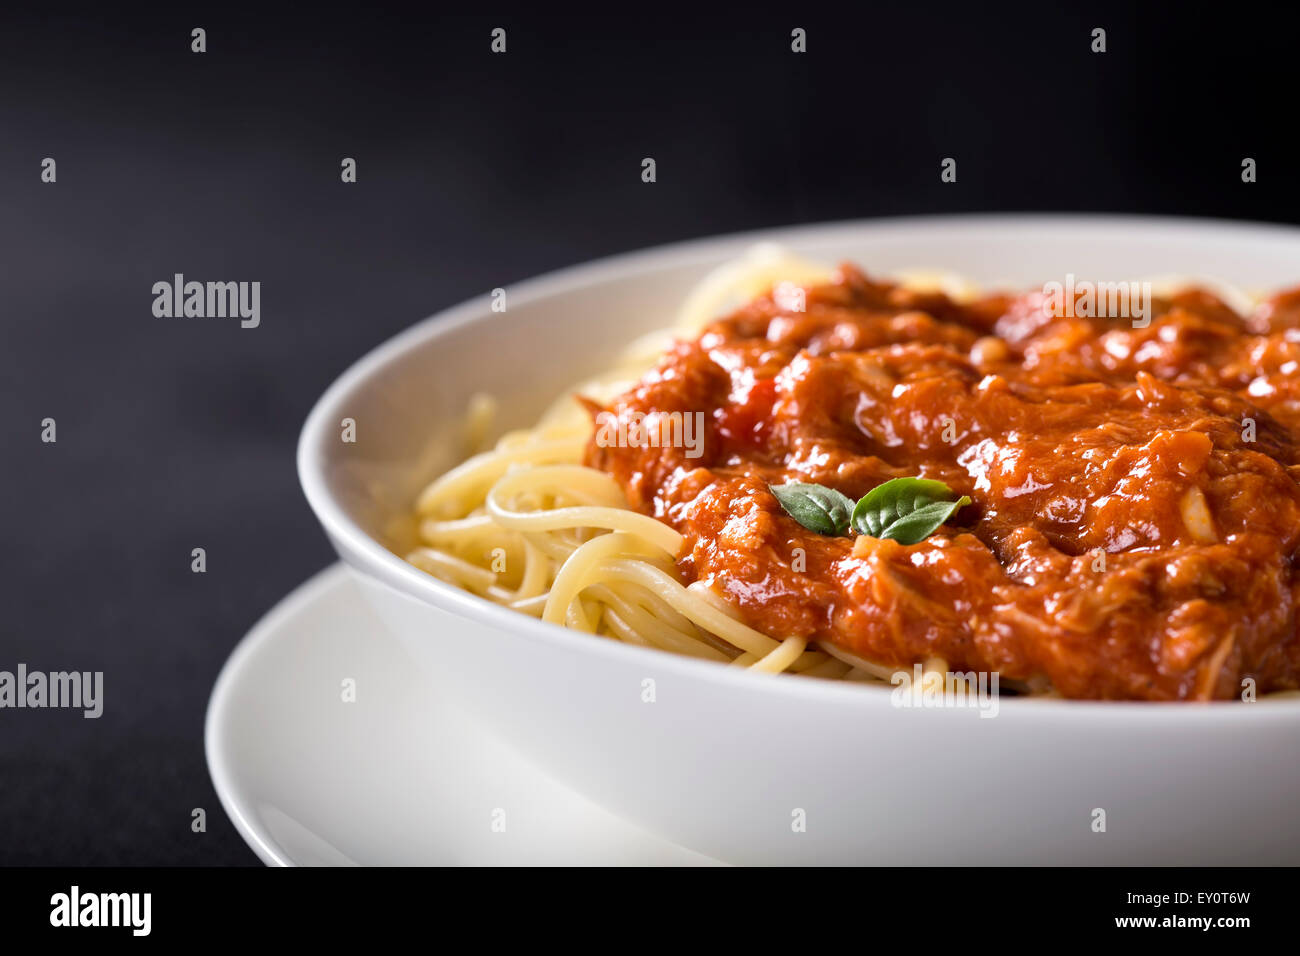 Spaghetti with Tuna sauce over black background with copy space Stock Photo